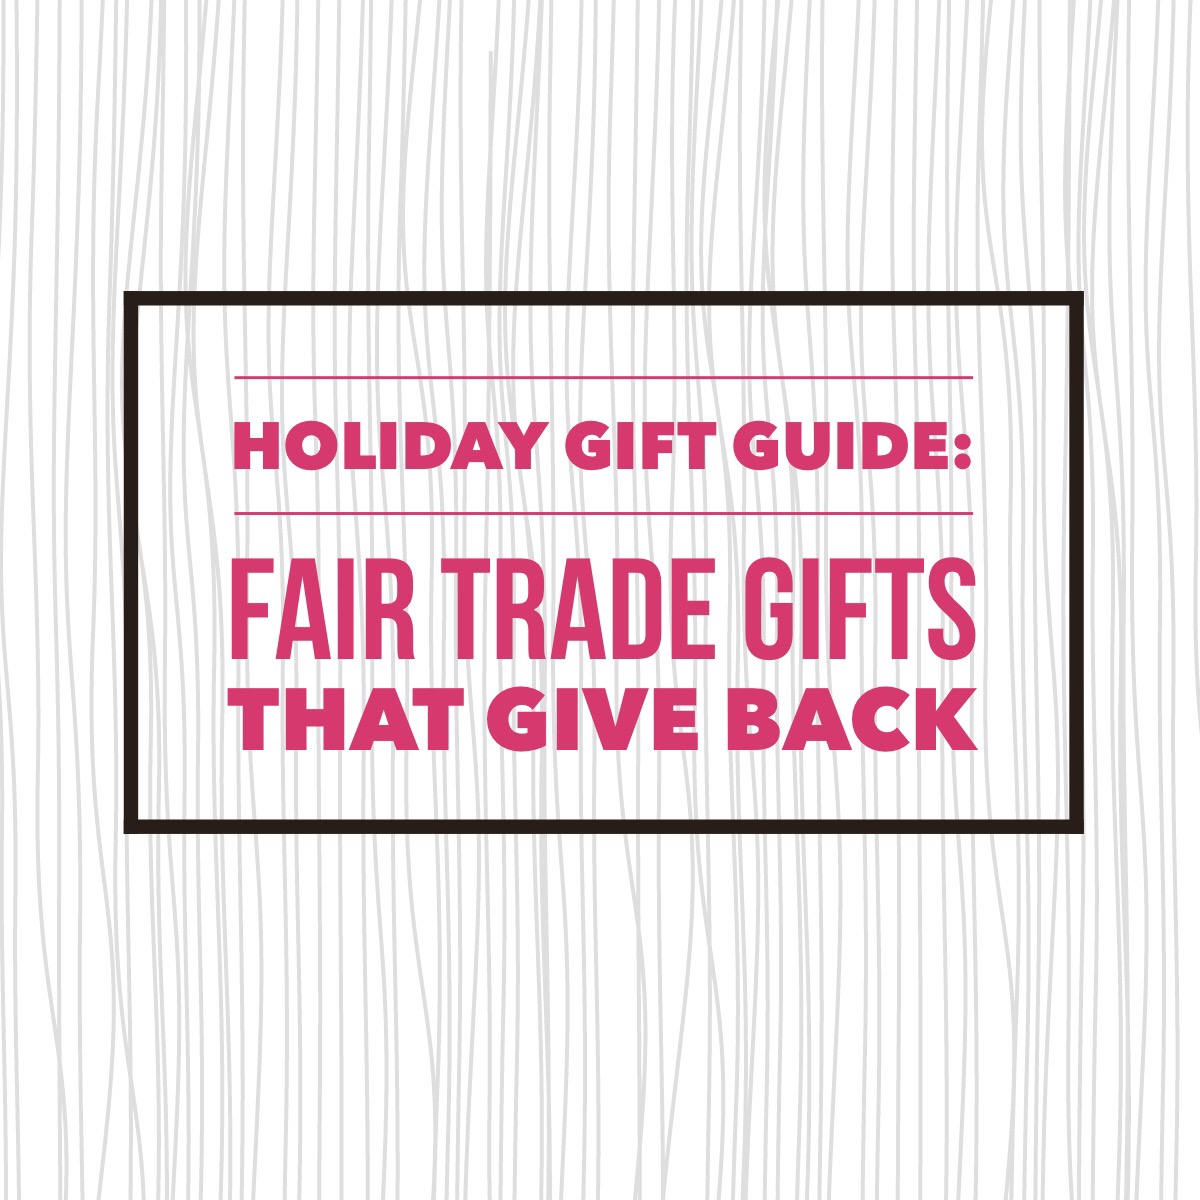 Holiday Gift Guide: Fair Trade Gifts That Give Back